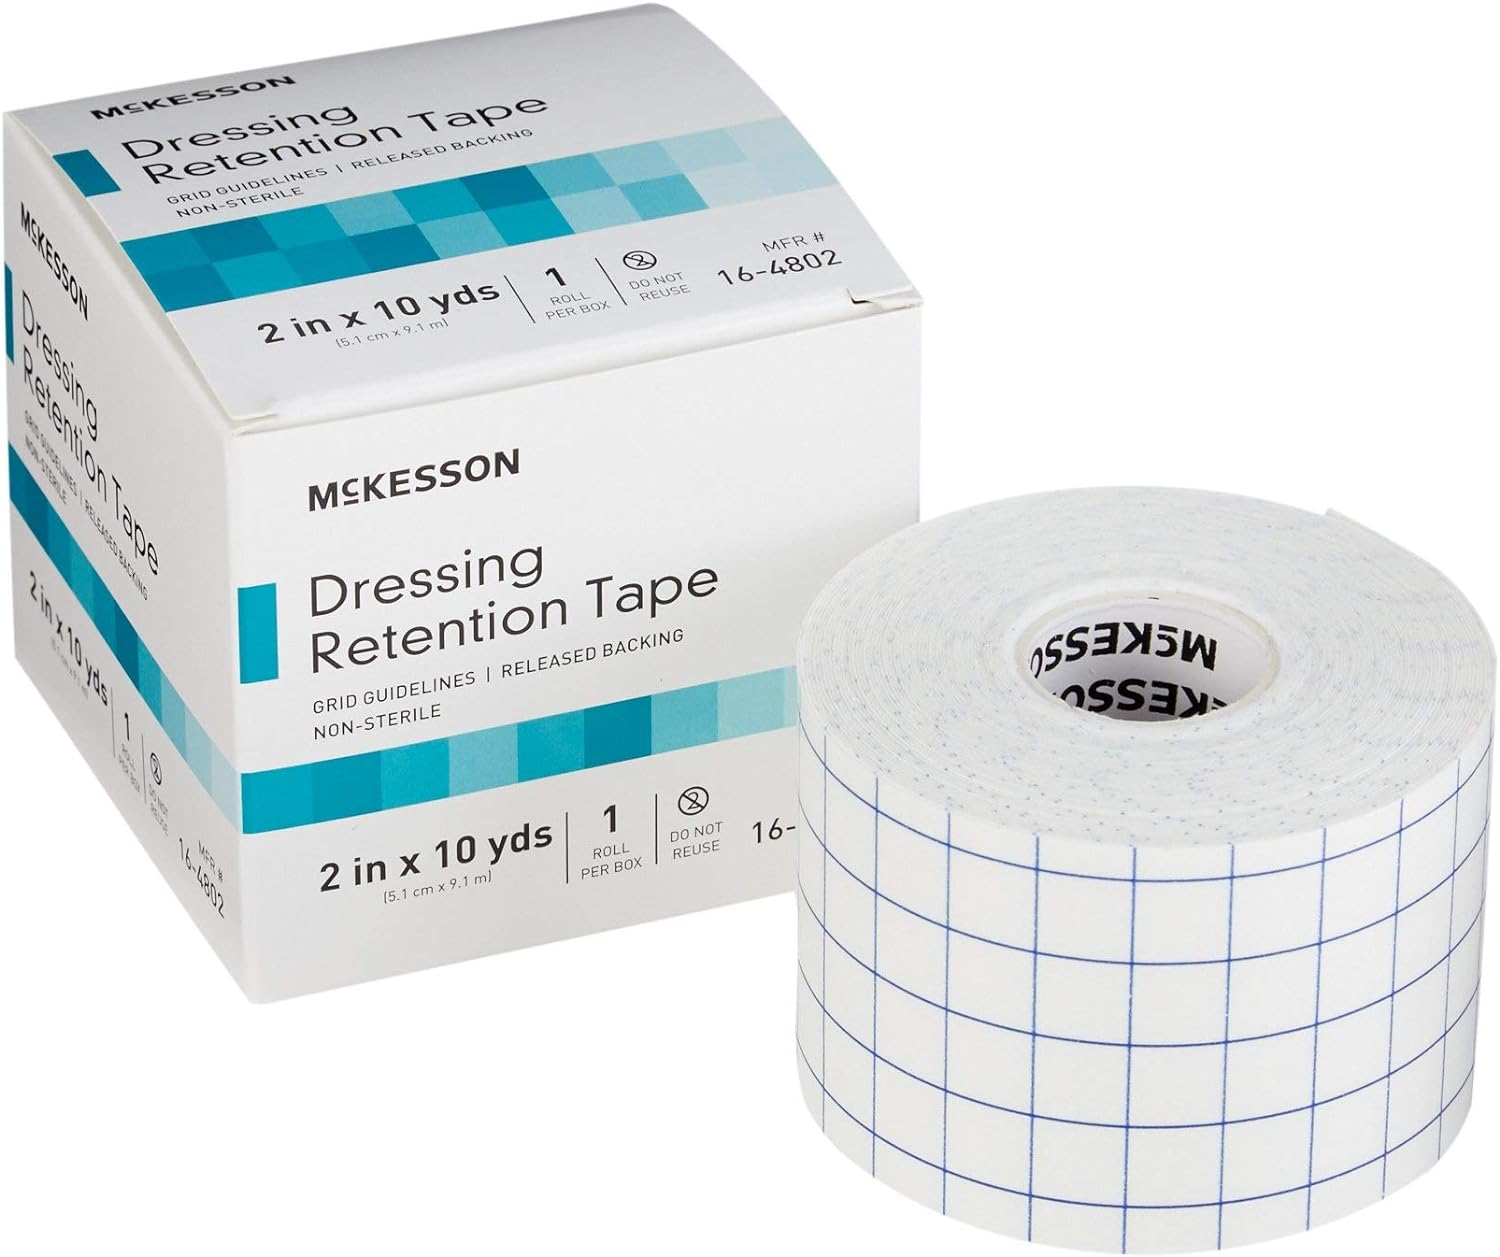 McKesson White Dressing Retention Tape, 2 inches x 10 Yards, 1 Roll, 24 Packs, 24 Total